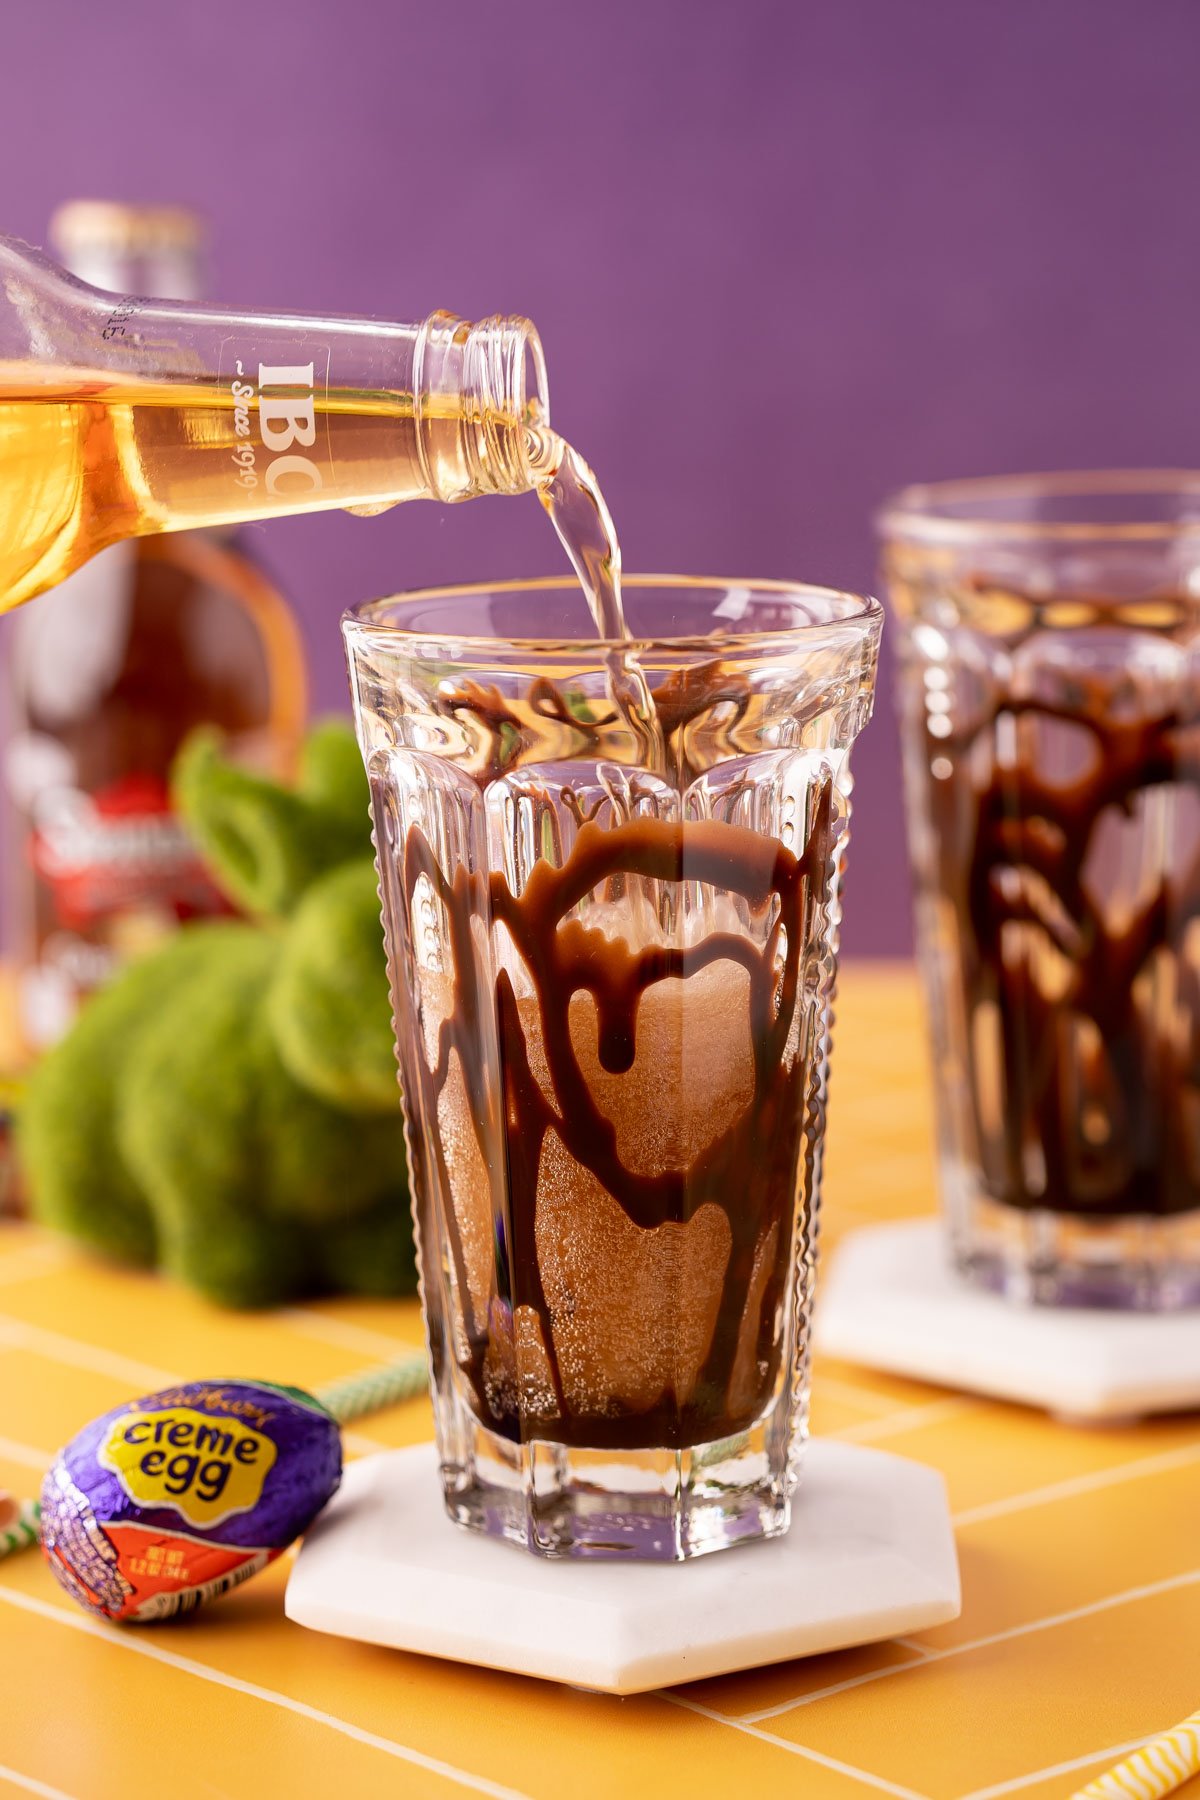 Cream soda being poured into a glass with chocolate syrup.